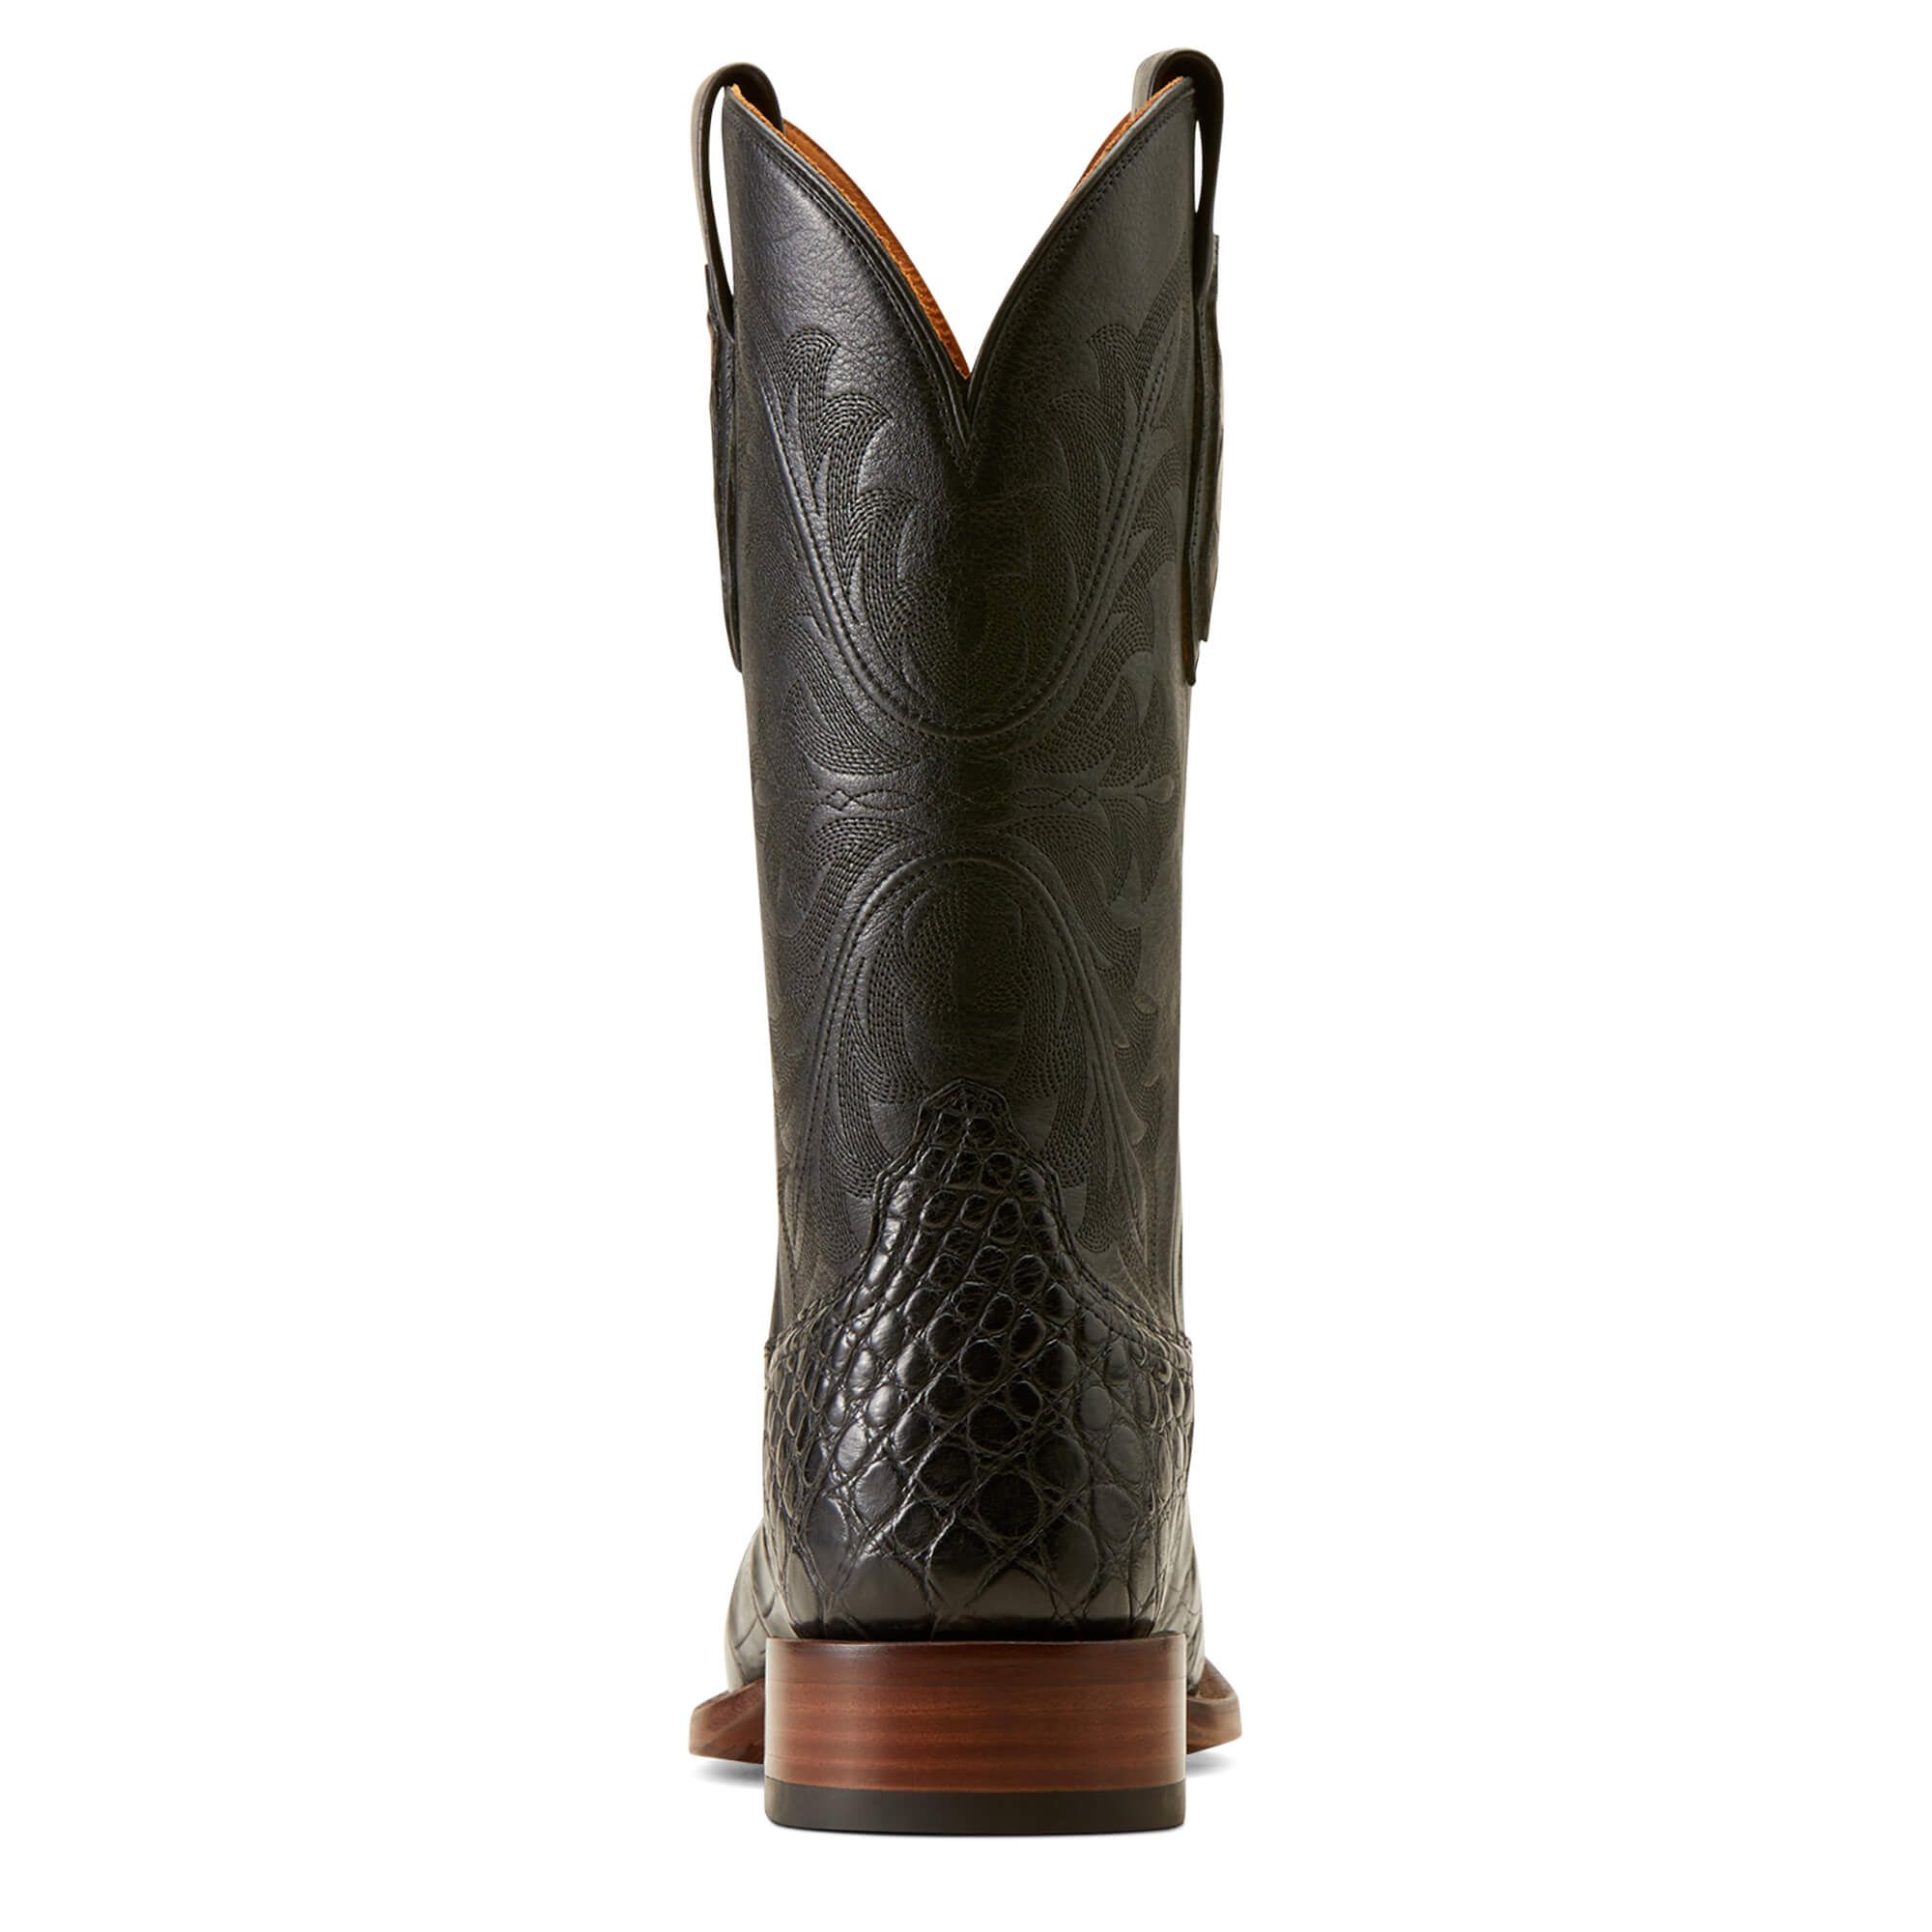 An
Overview Of Alligator Boots